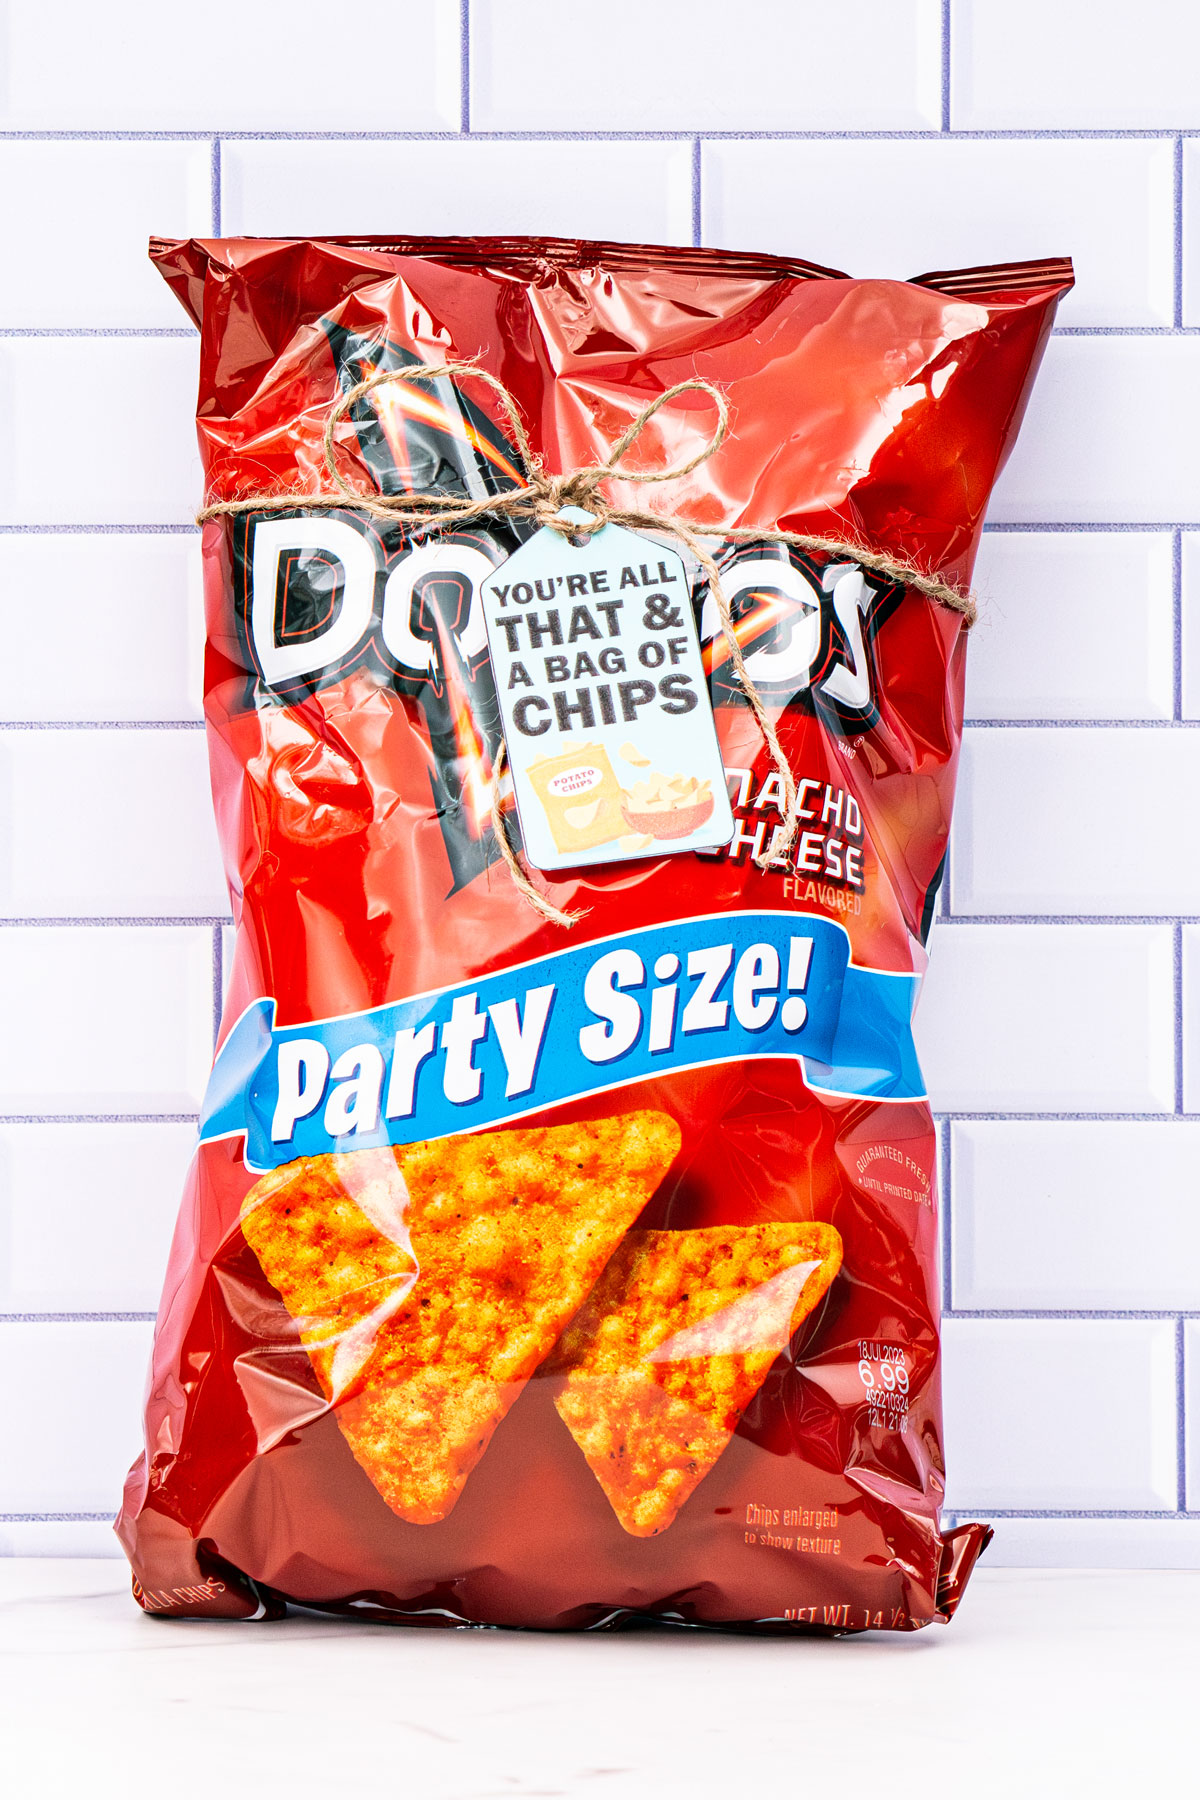 This is a bag of Doritos with a tag that says you're all that and a bag of chips.